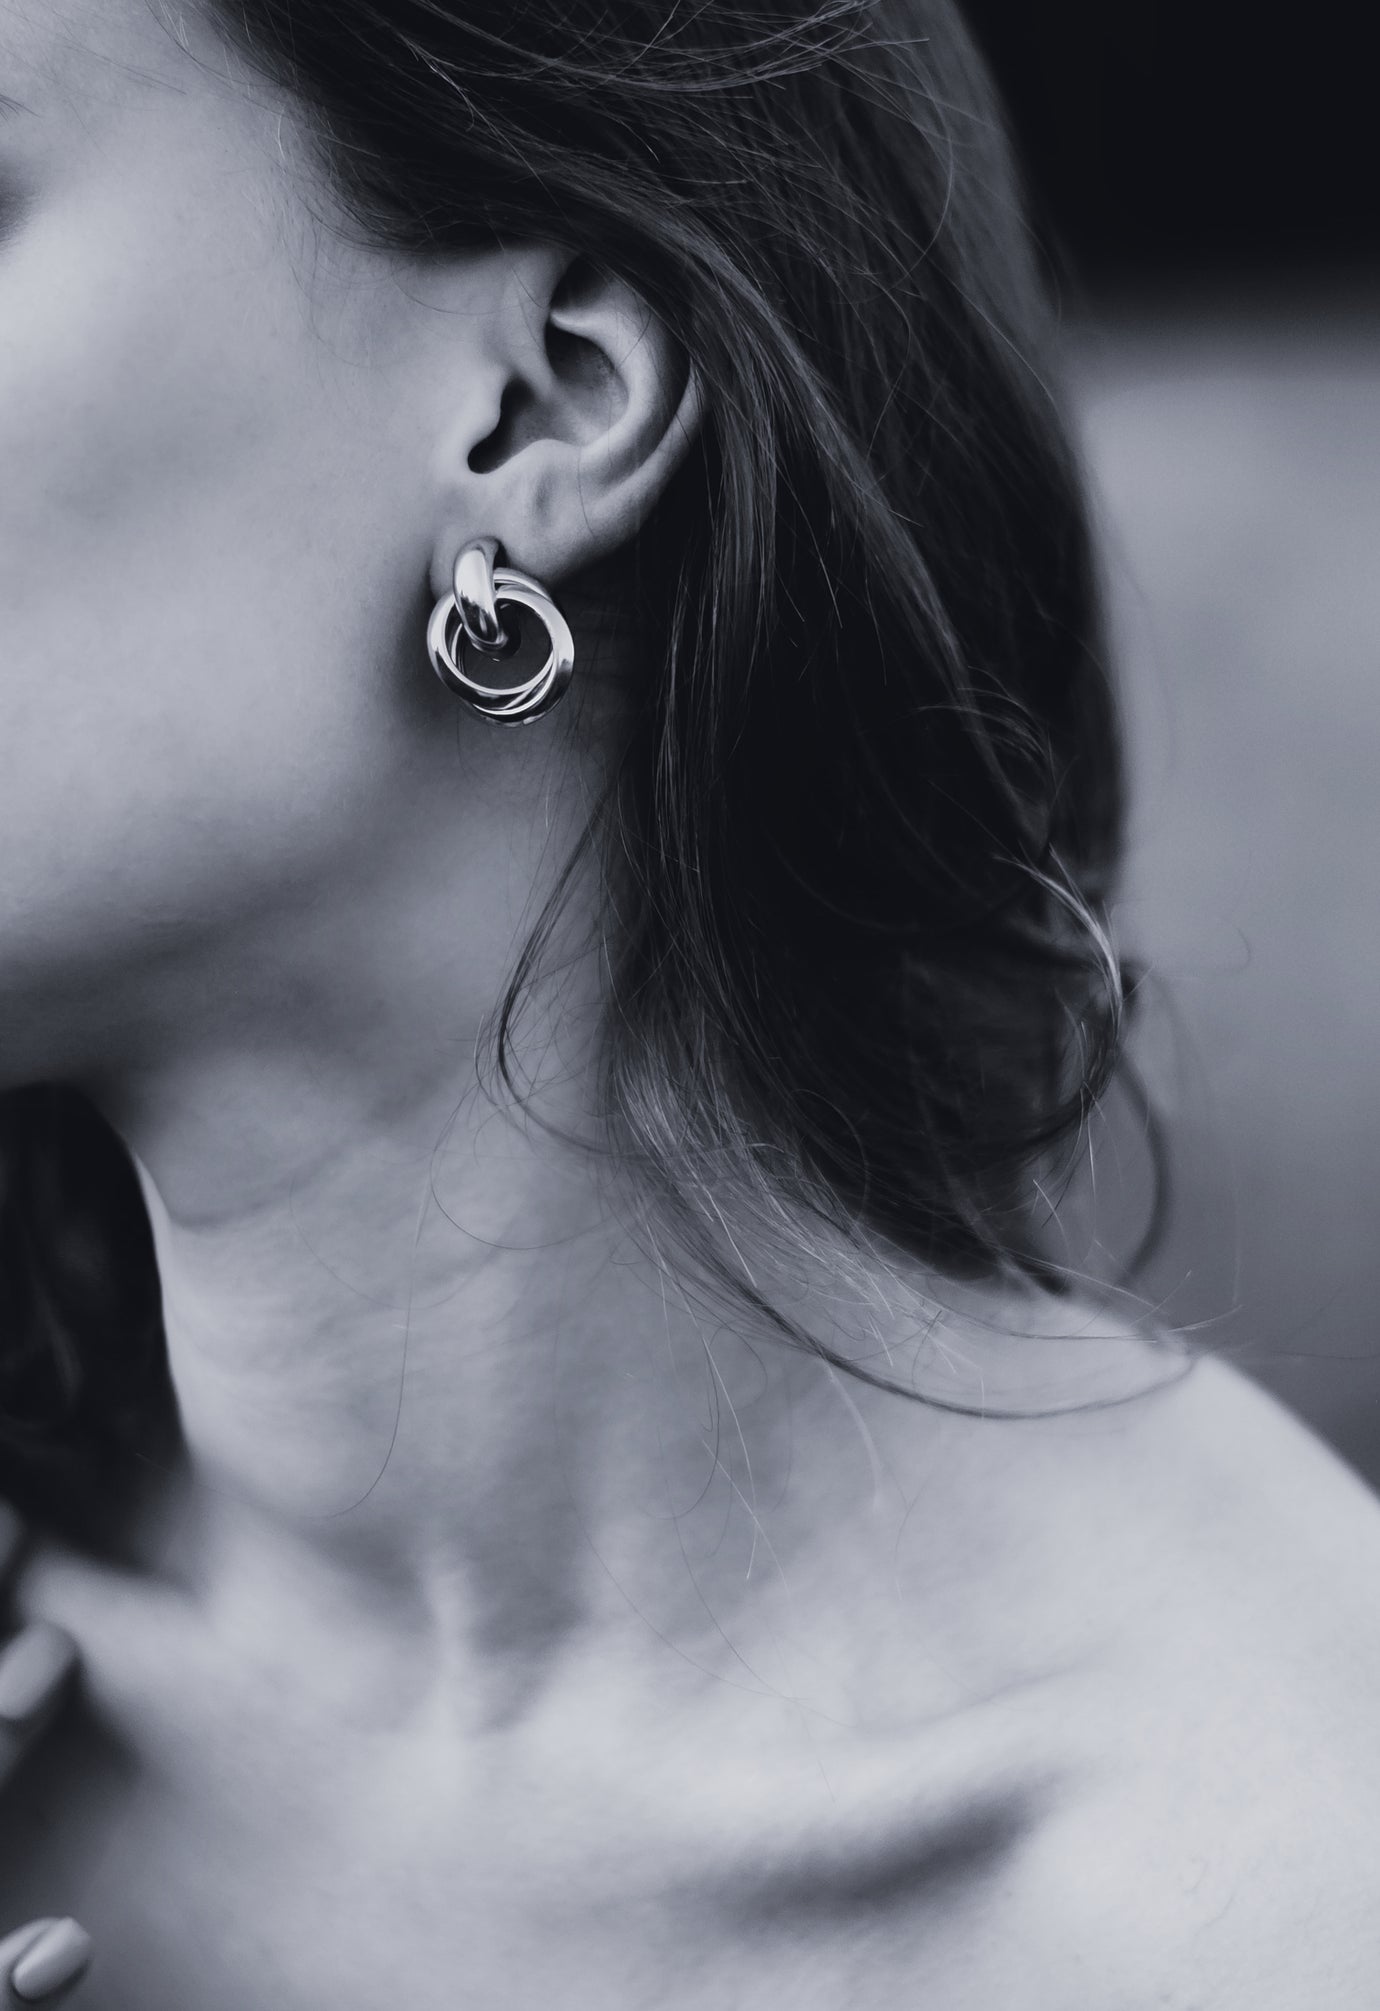 From Ancient Dynasties to Present Day, The Beloved Earring is Here to Stay